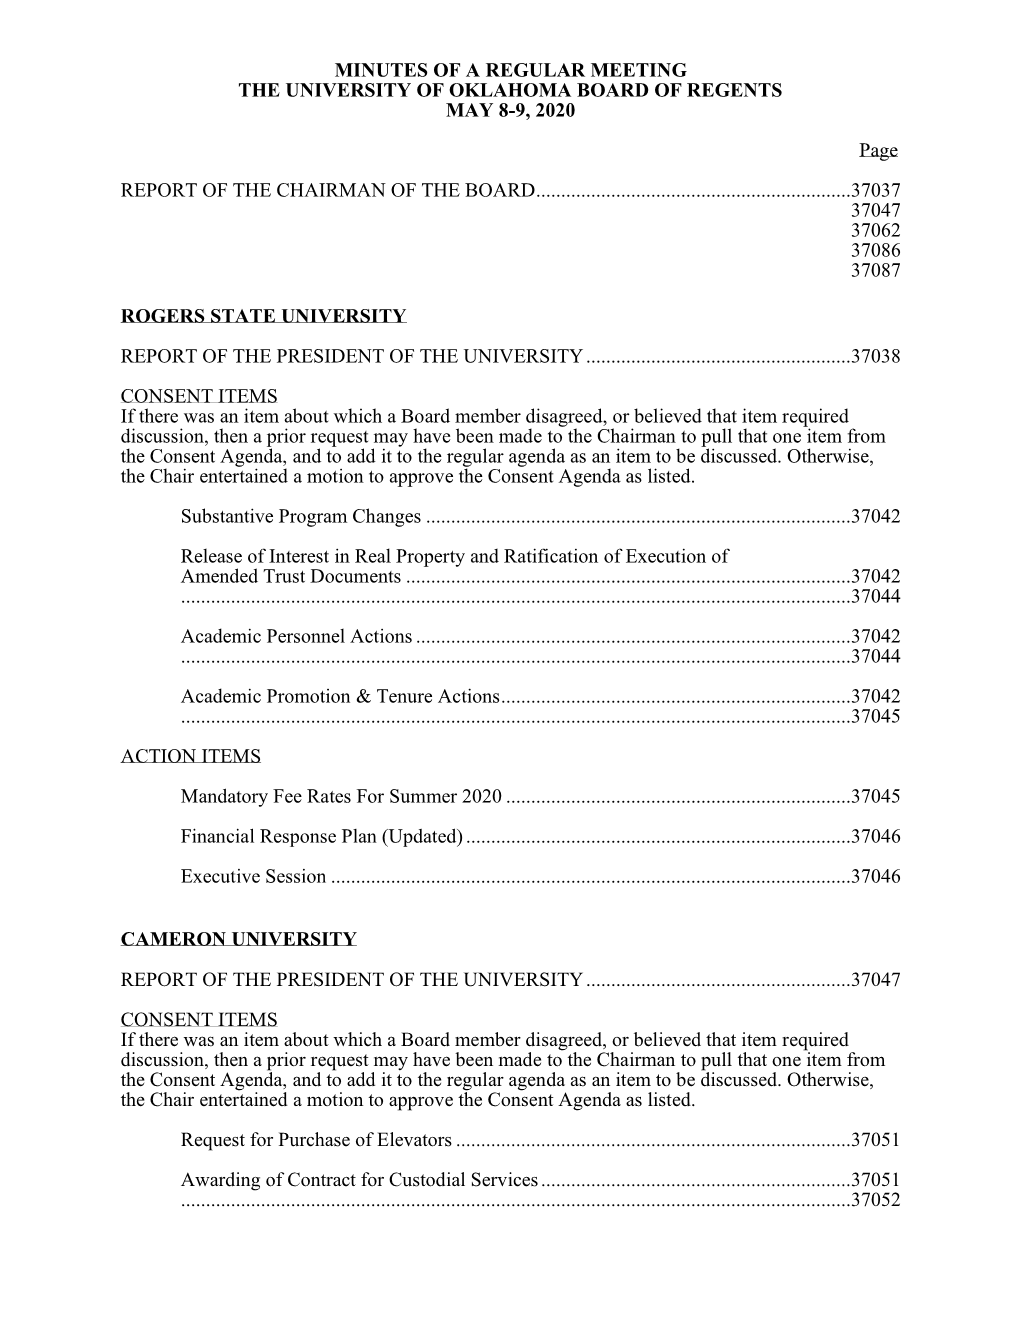 Minutes of a Regular Meeting the University of Oklahoma Board of Regents May 8-9, 2020